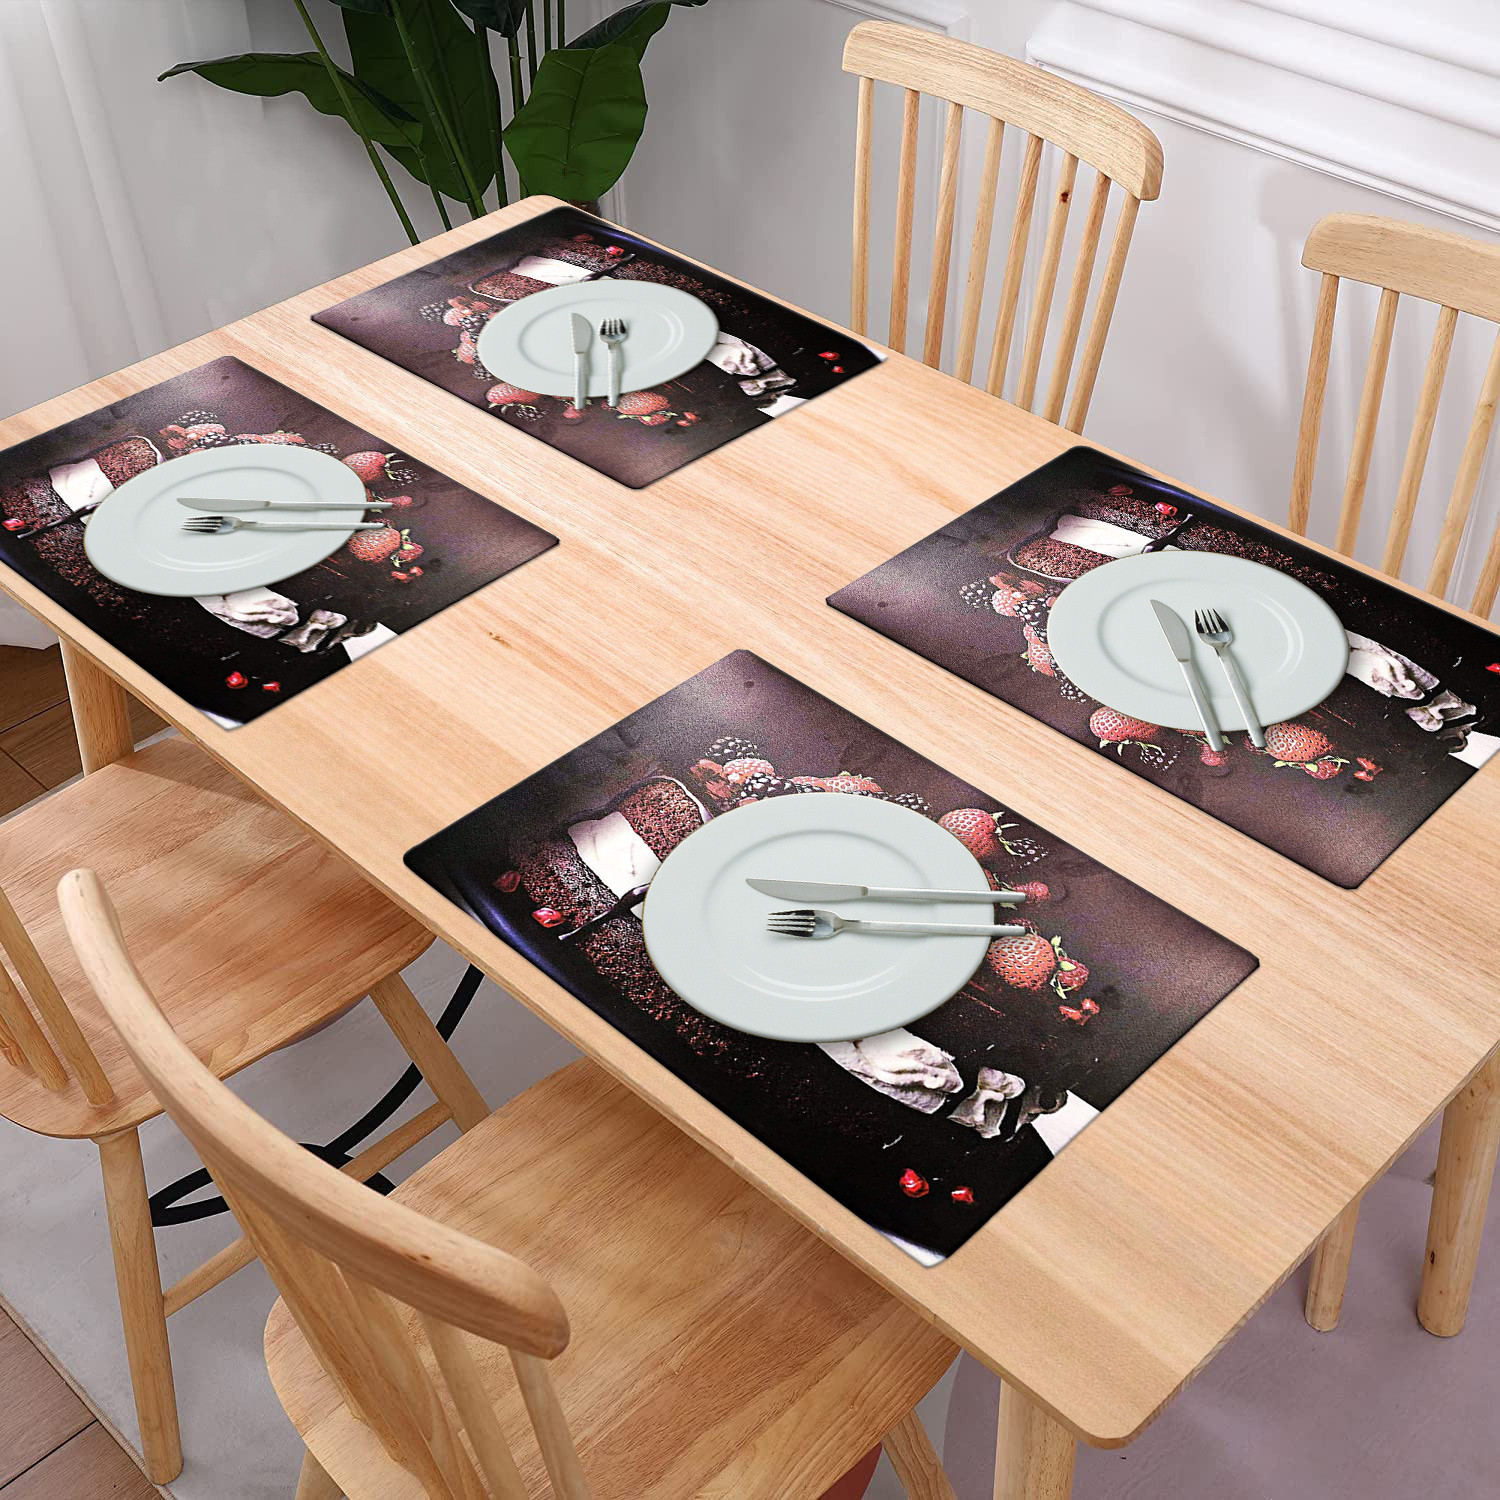 Kuber Industries Multiuses Strawberry Print PVC Table Placemat for kitchen, Dining Table Set of 6 (Black)